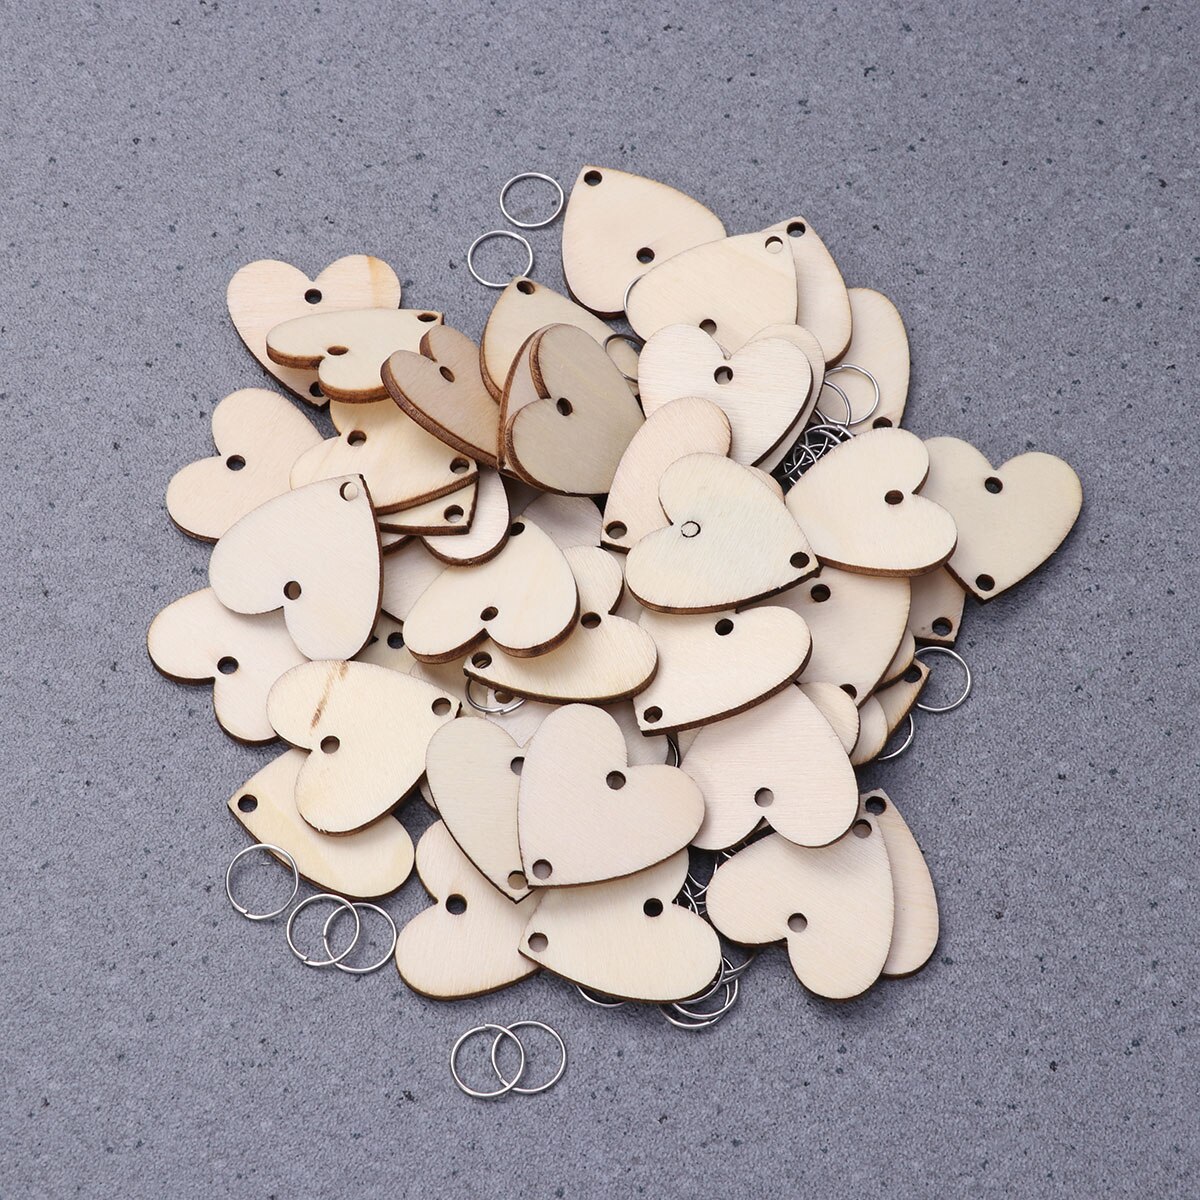 50pcs Heart Wooden Slices With 50 Iron Loops Set For Birthday Reminder Hanging Wooden Plaque Board DIY Calendar Accessories